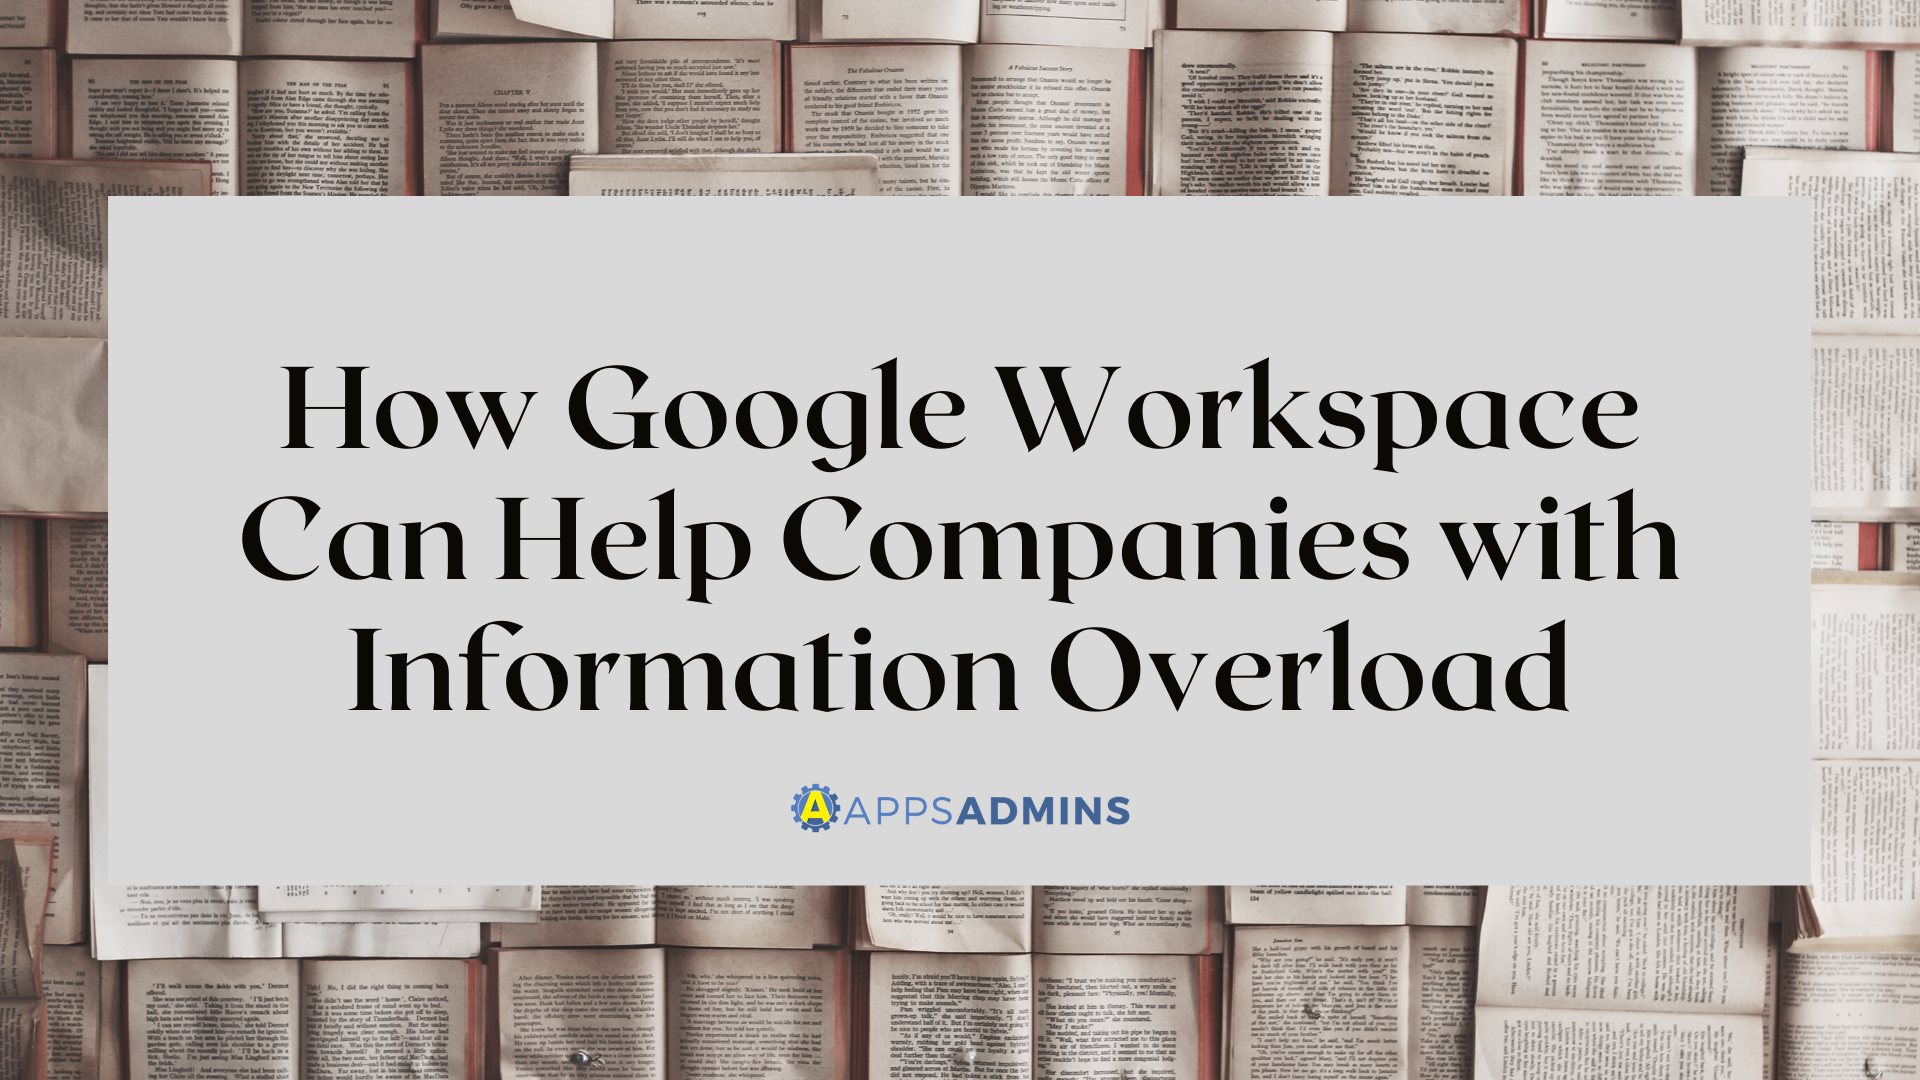 How Google Workspace Can Help Companies with Information Overload